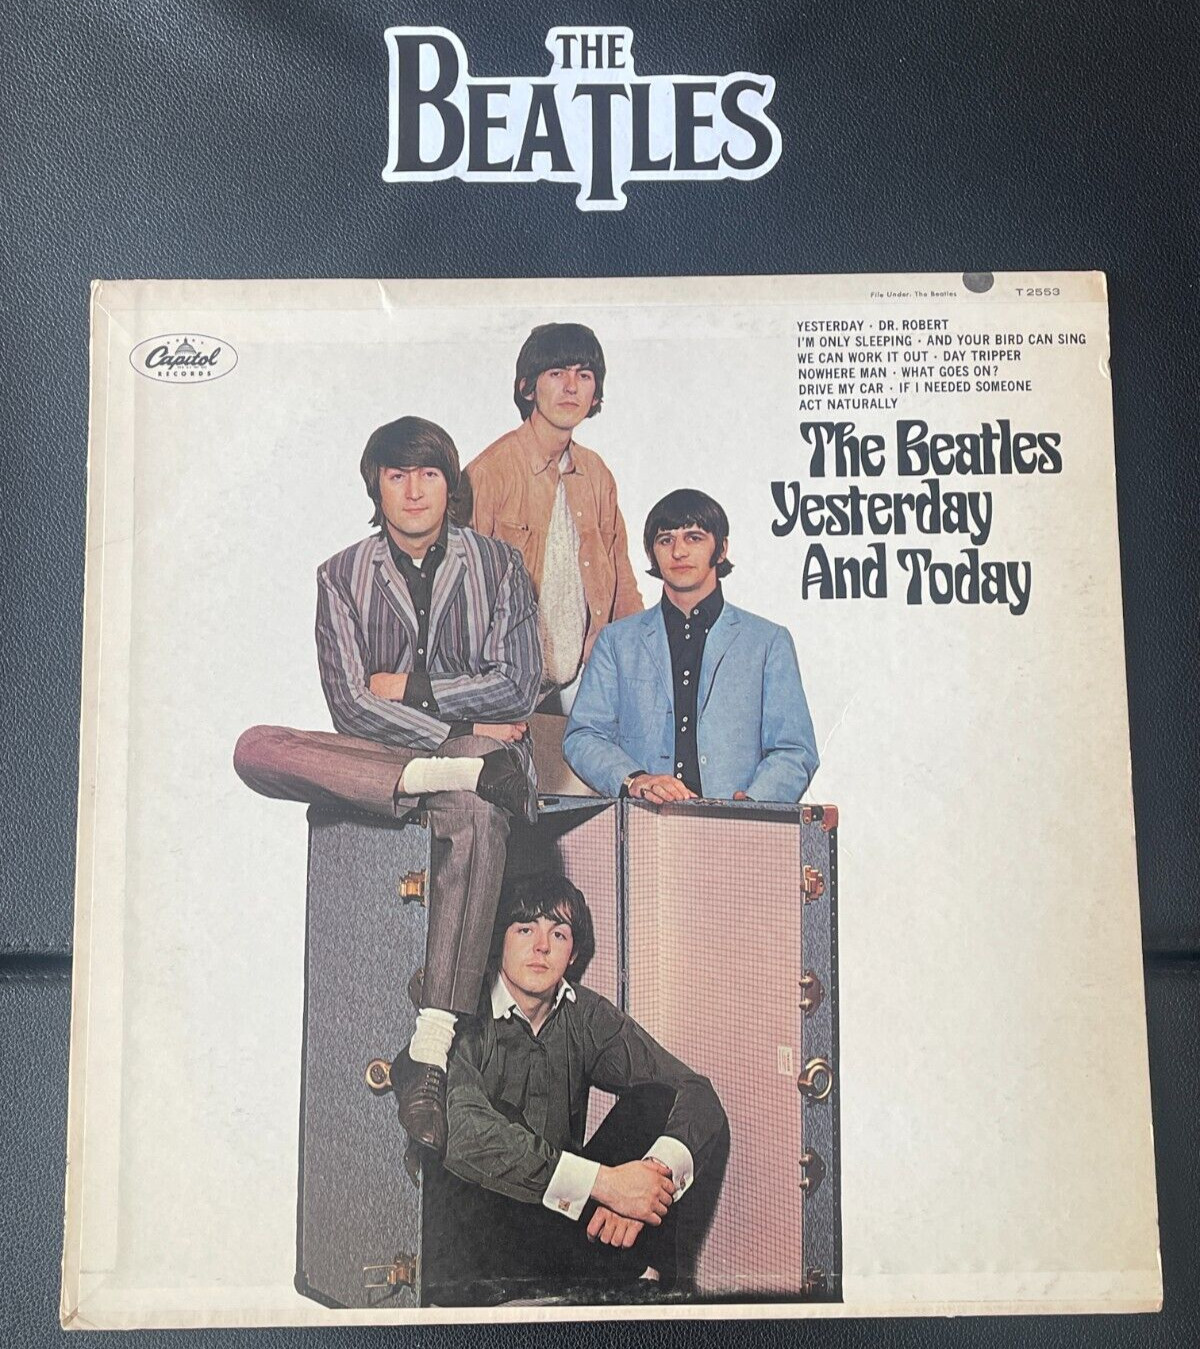 The Beatles* Yesterday and Today * ORIGINAL * MONO * T2553 * RIAA #3 * VG+